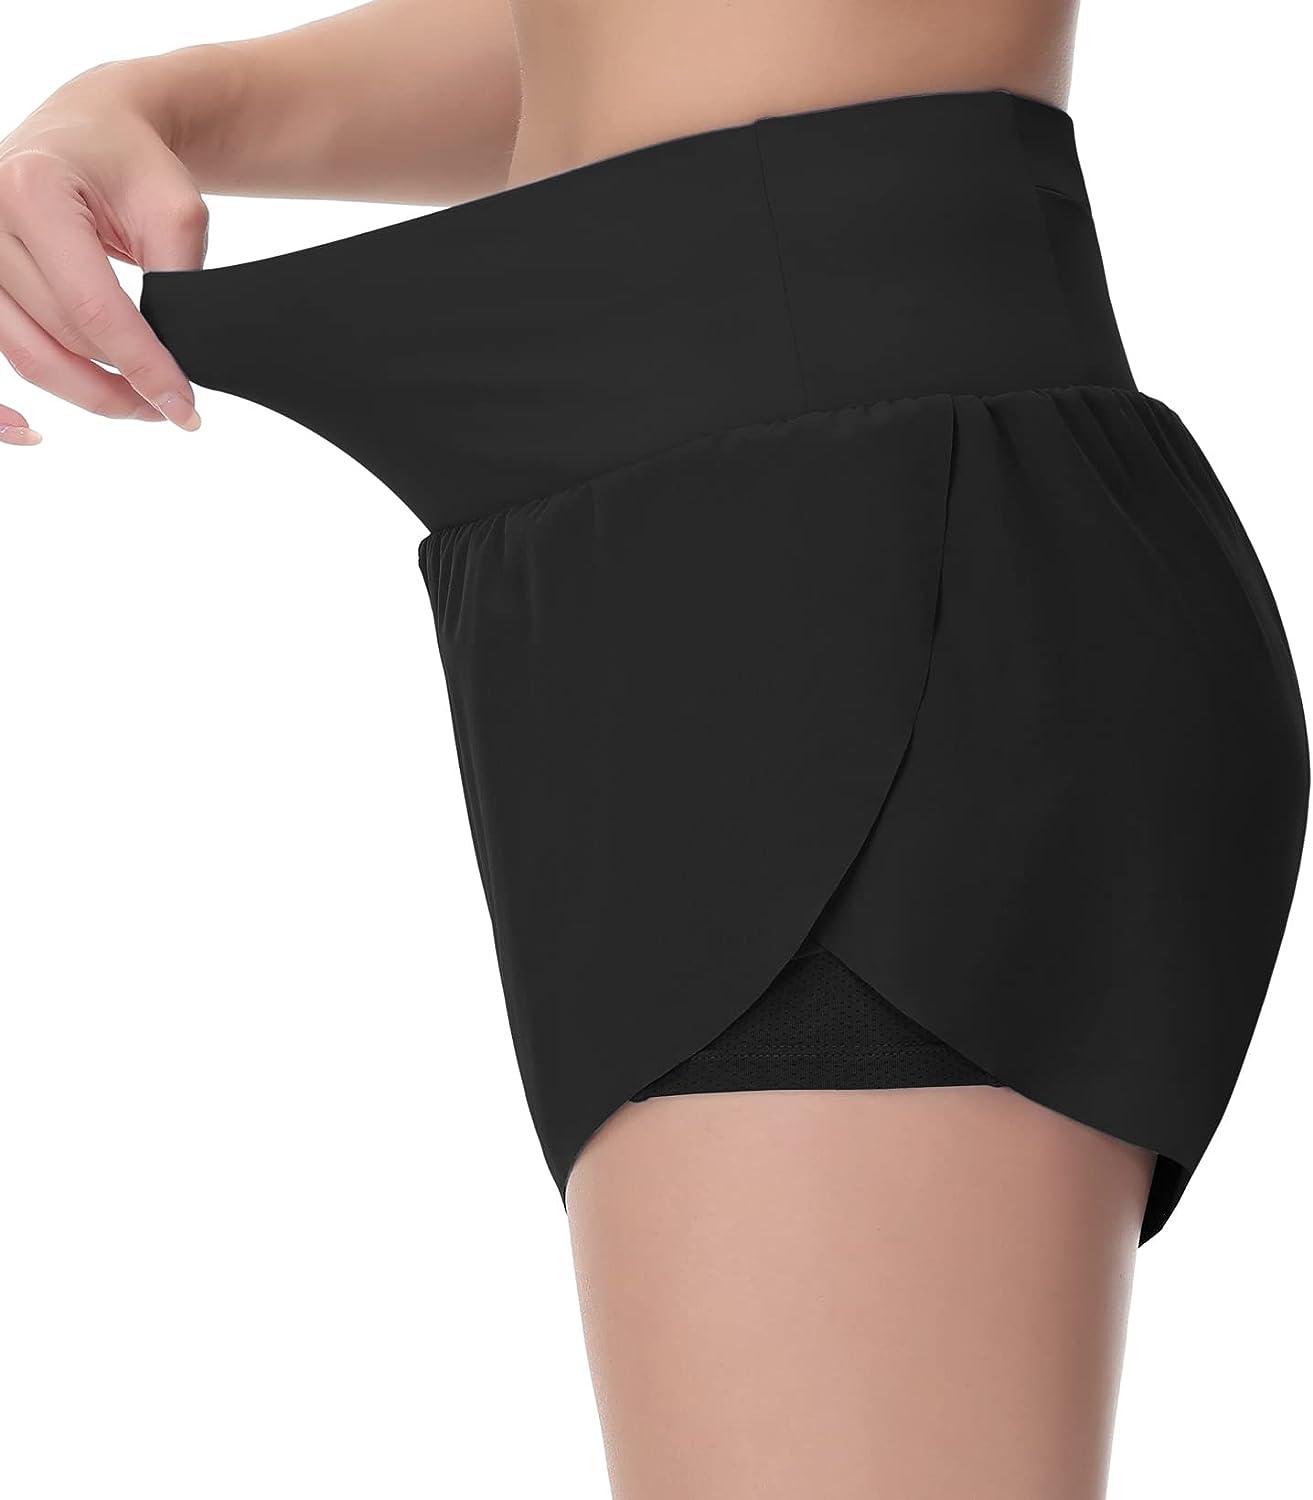 THE GYM PEOPLE Womens Quick Dry Running Shorts Mesh Liner High